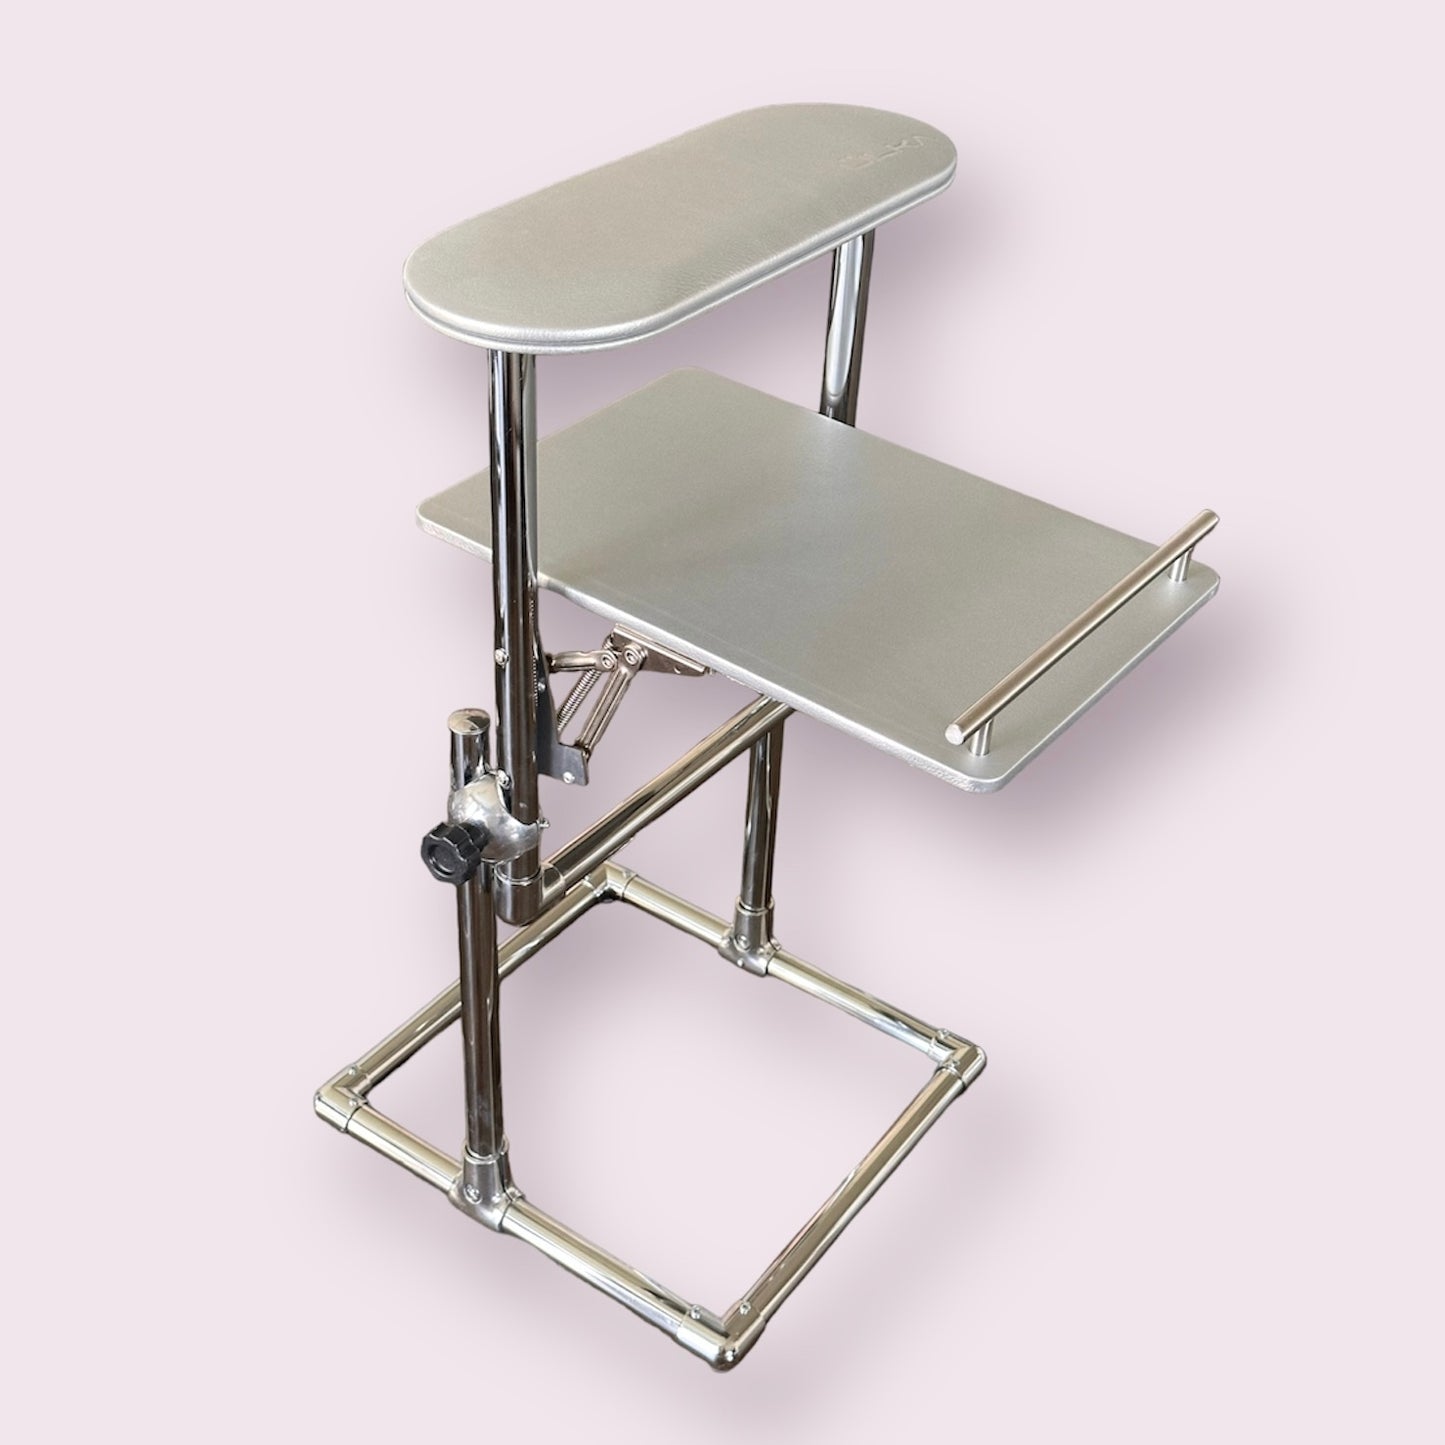 ULKA BALANCE Pedicure Stand for Nail Dust Vacuum Collector and tools